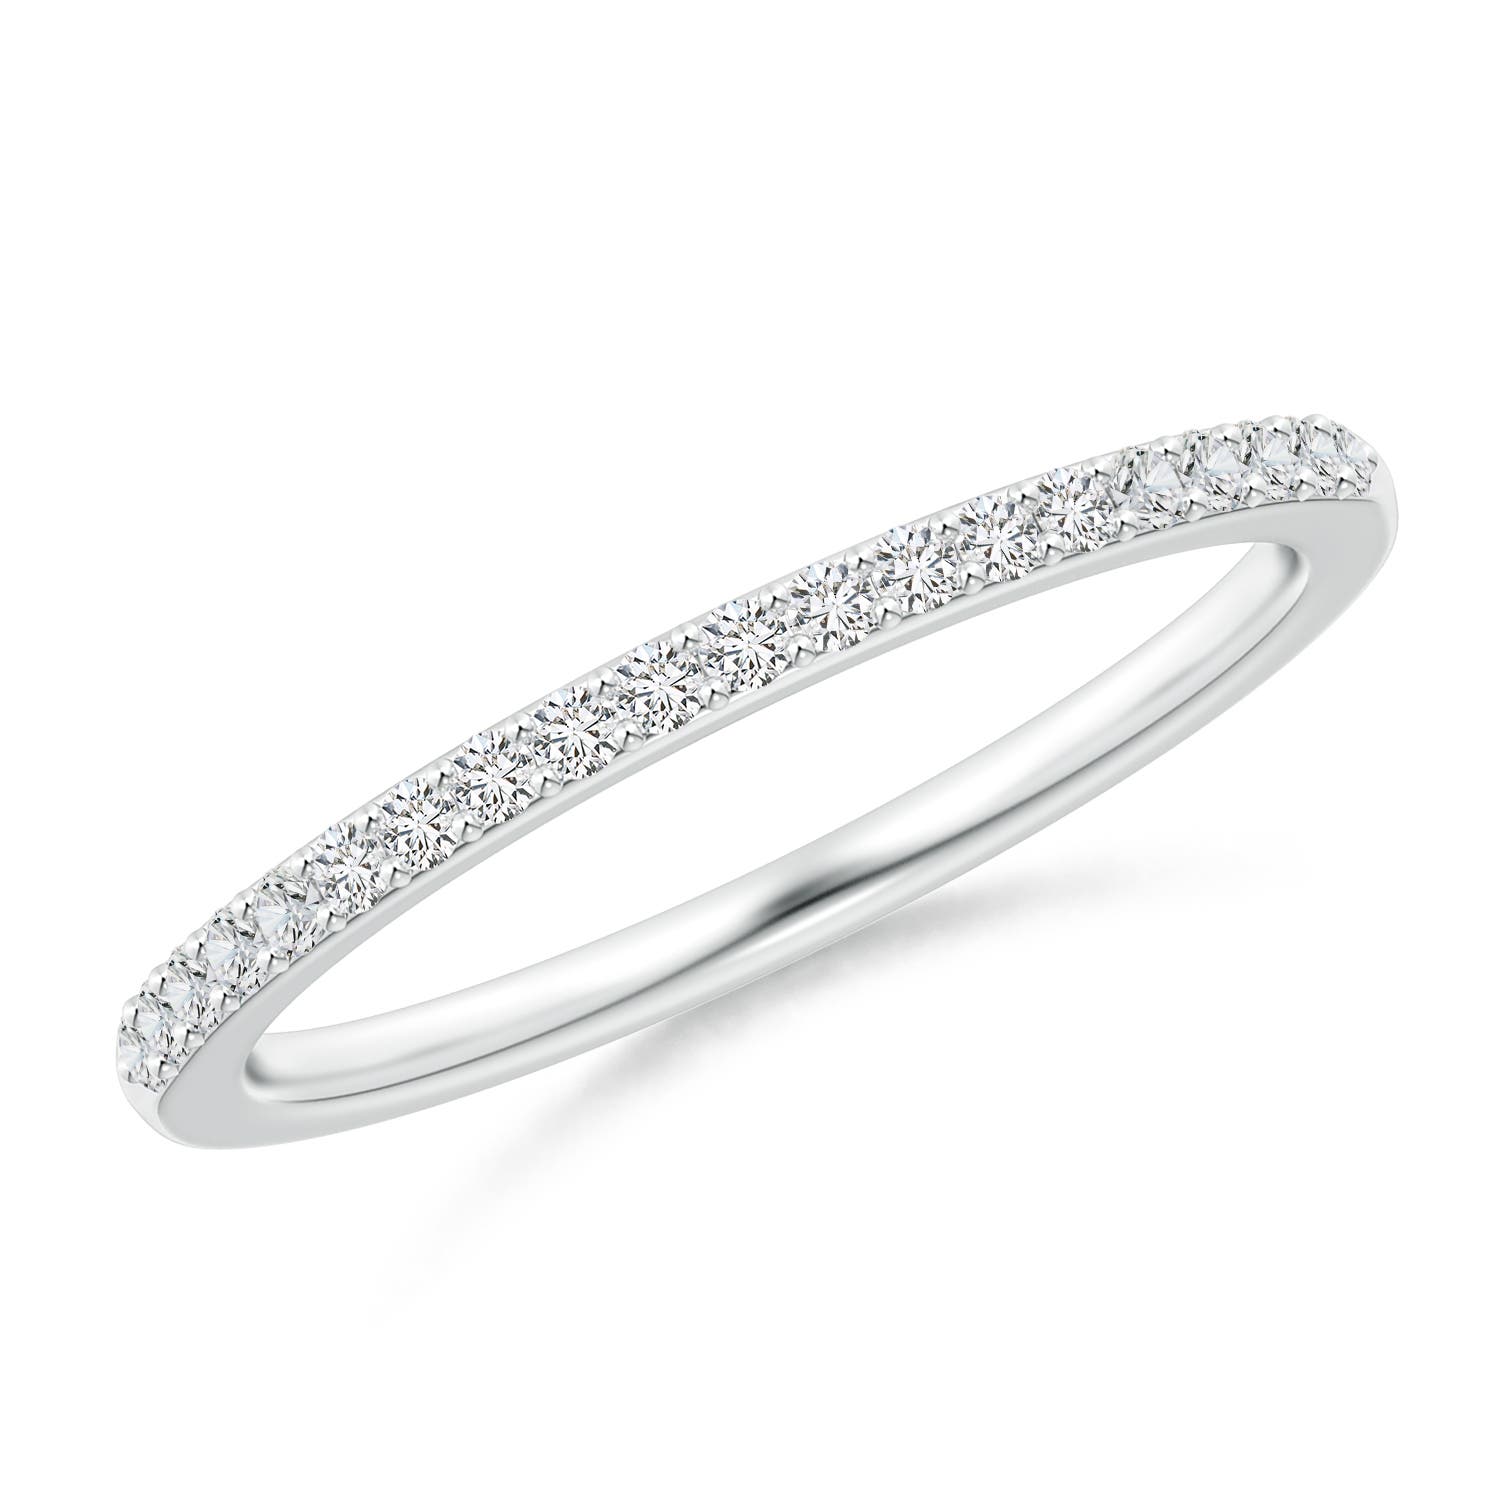 H, SI2 / 0.2 CT / 14 KT White Gold